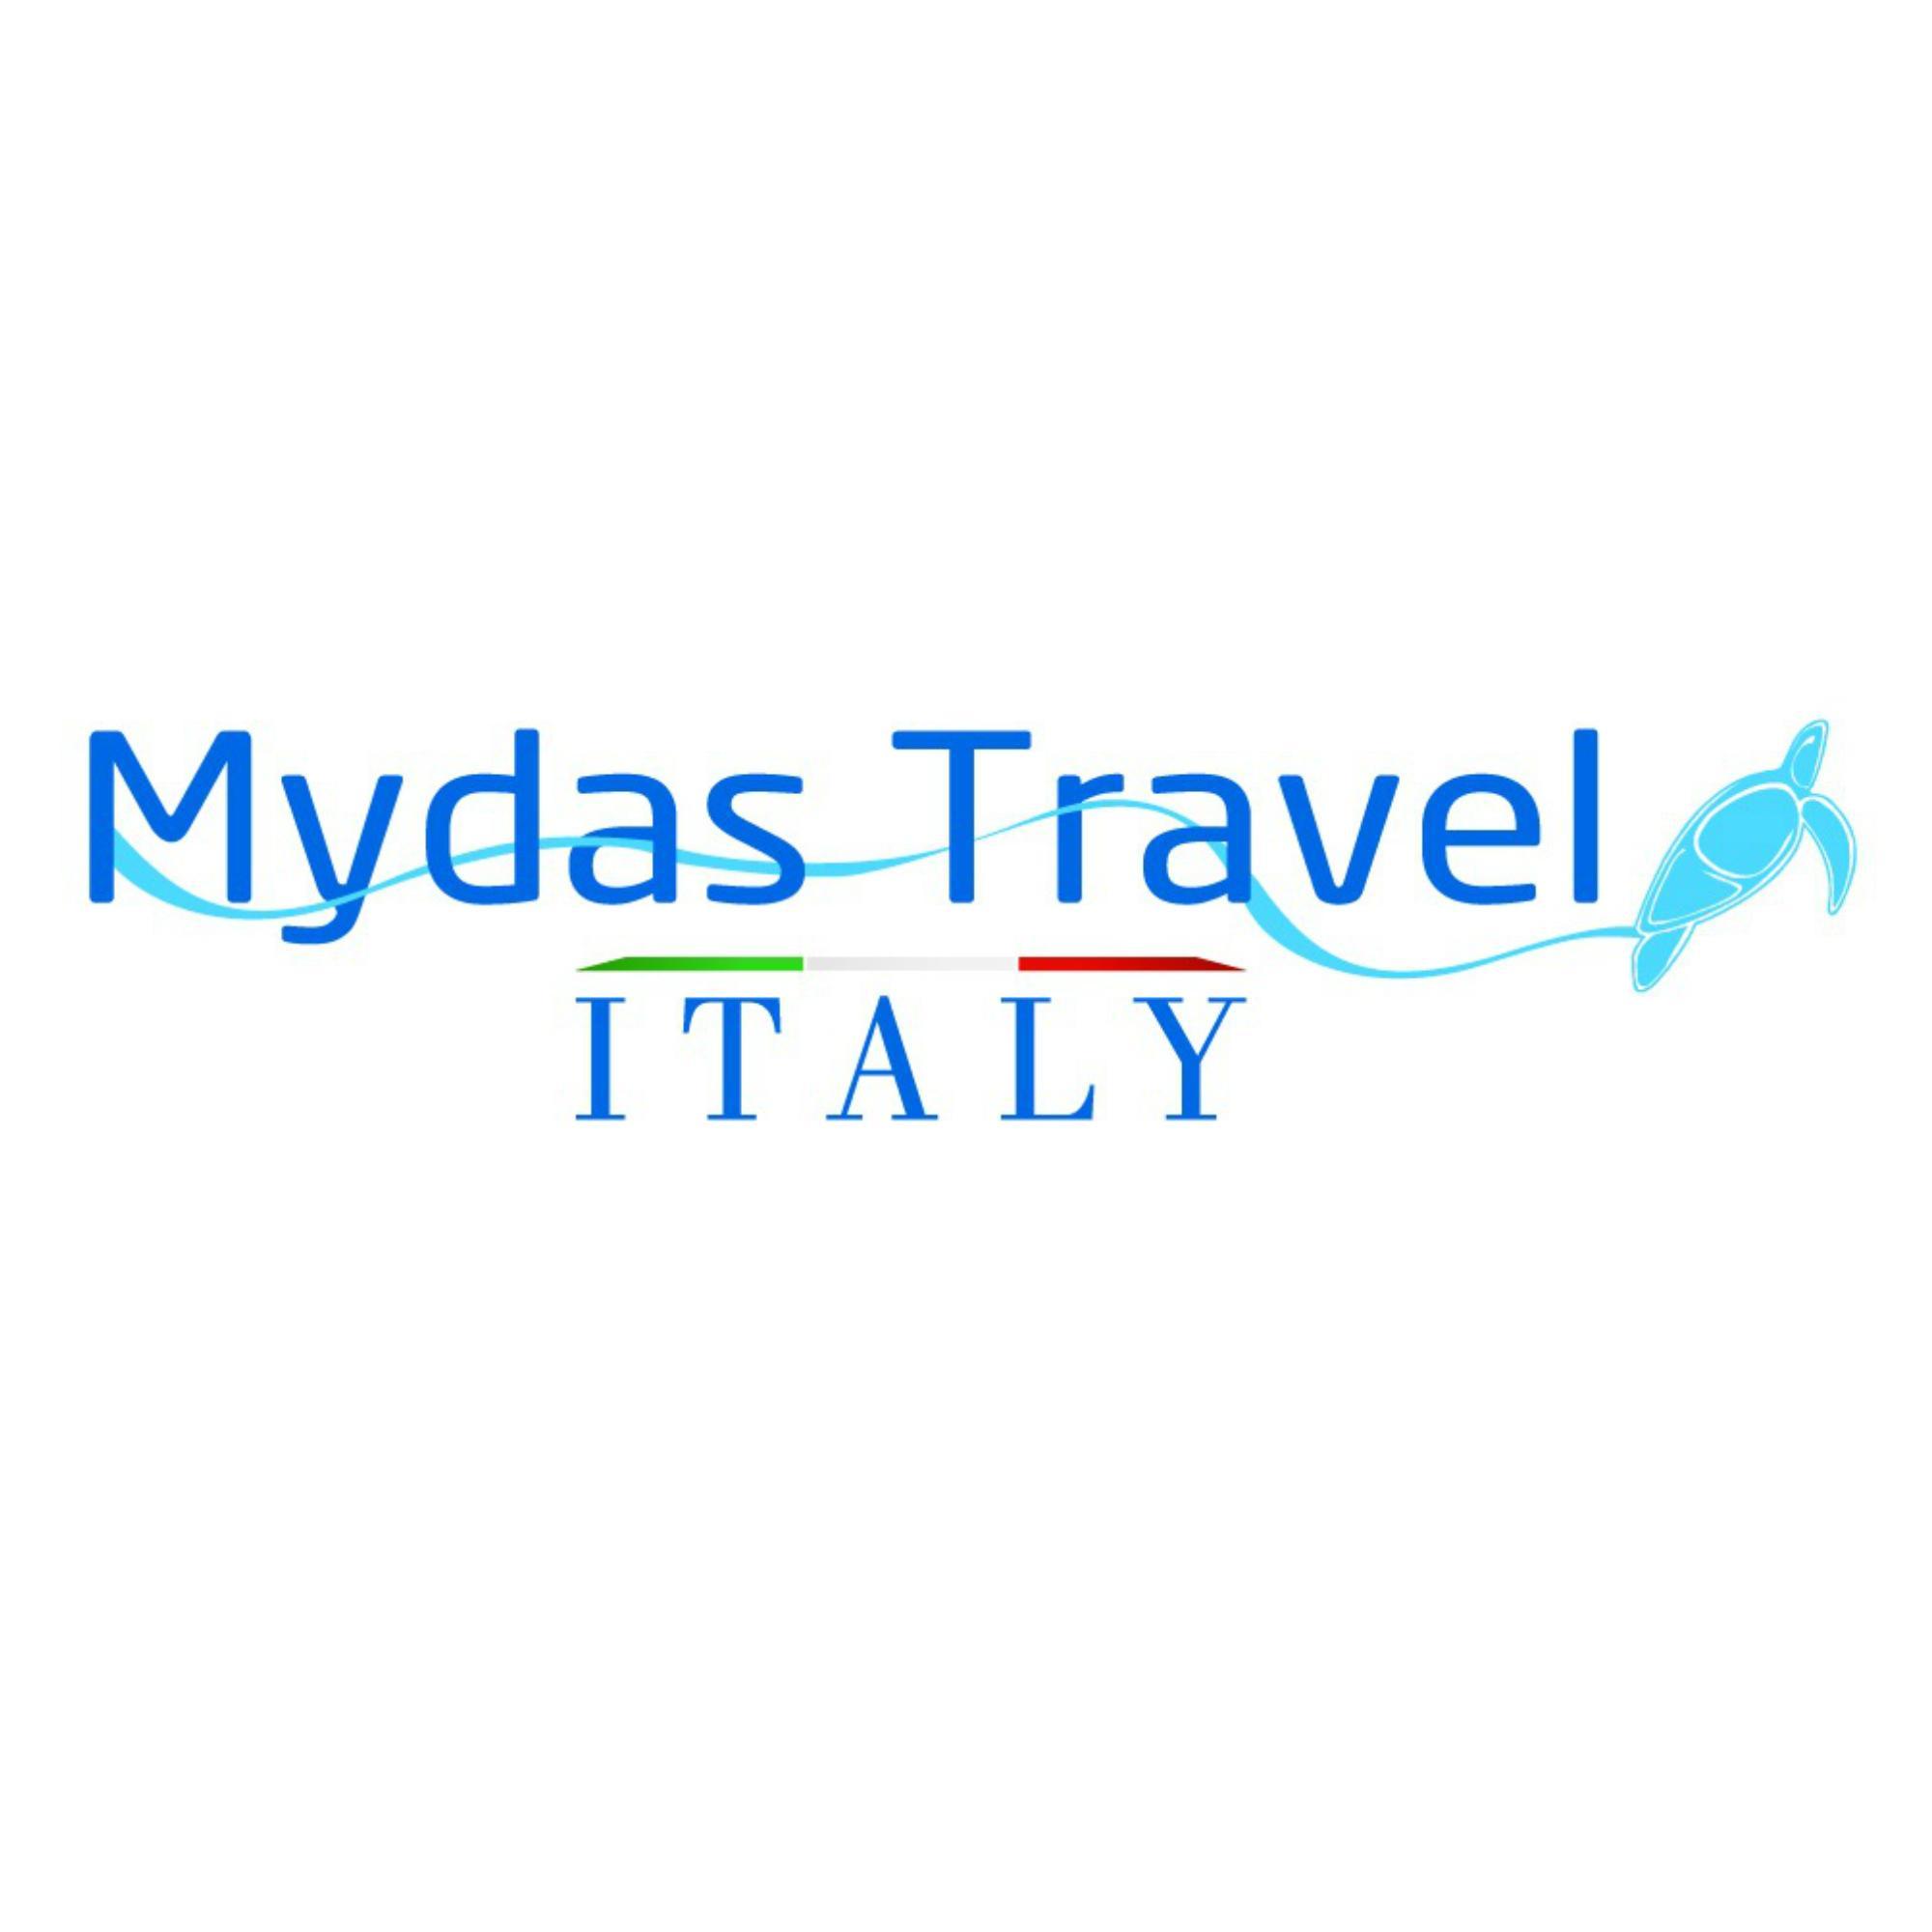 Come to Italy with the help of a 100% Italian tour operator!